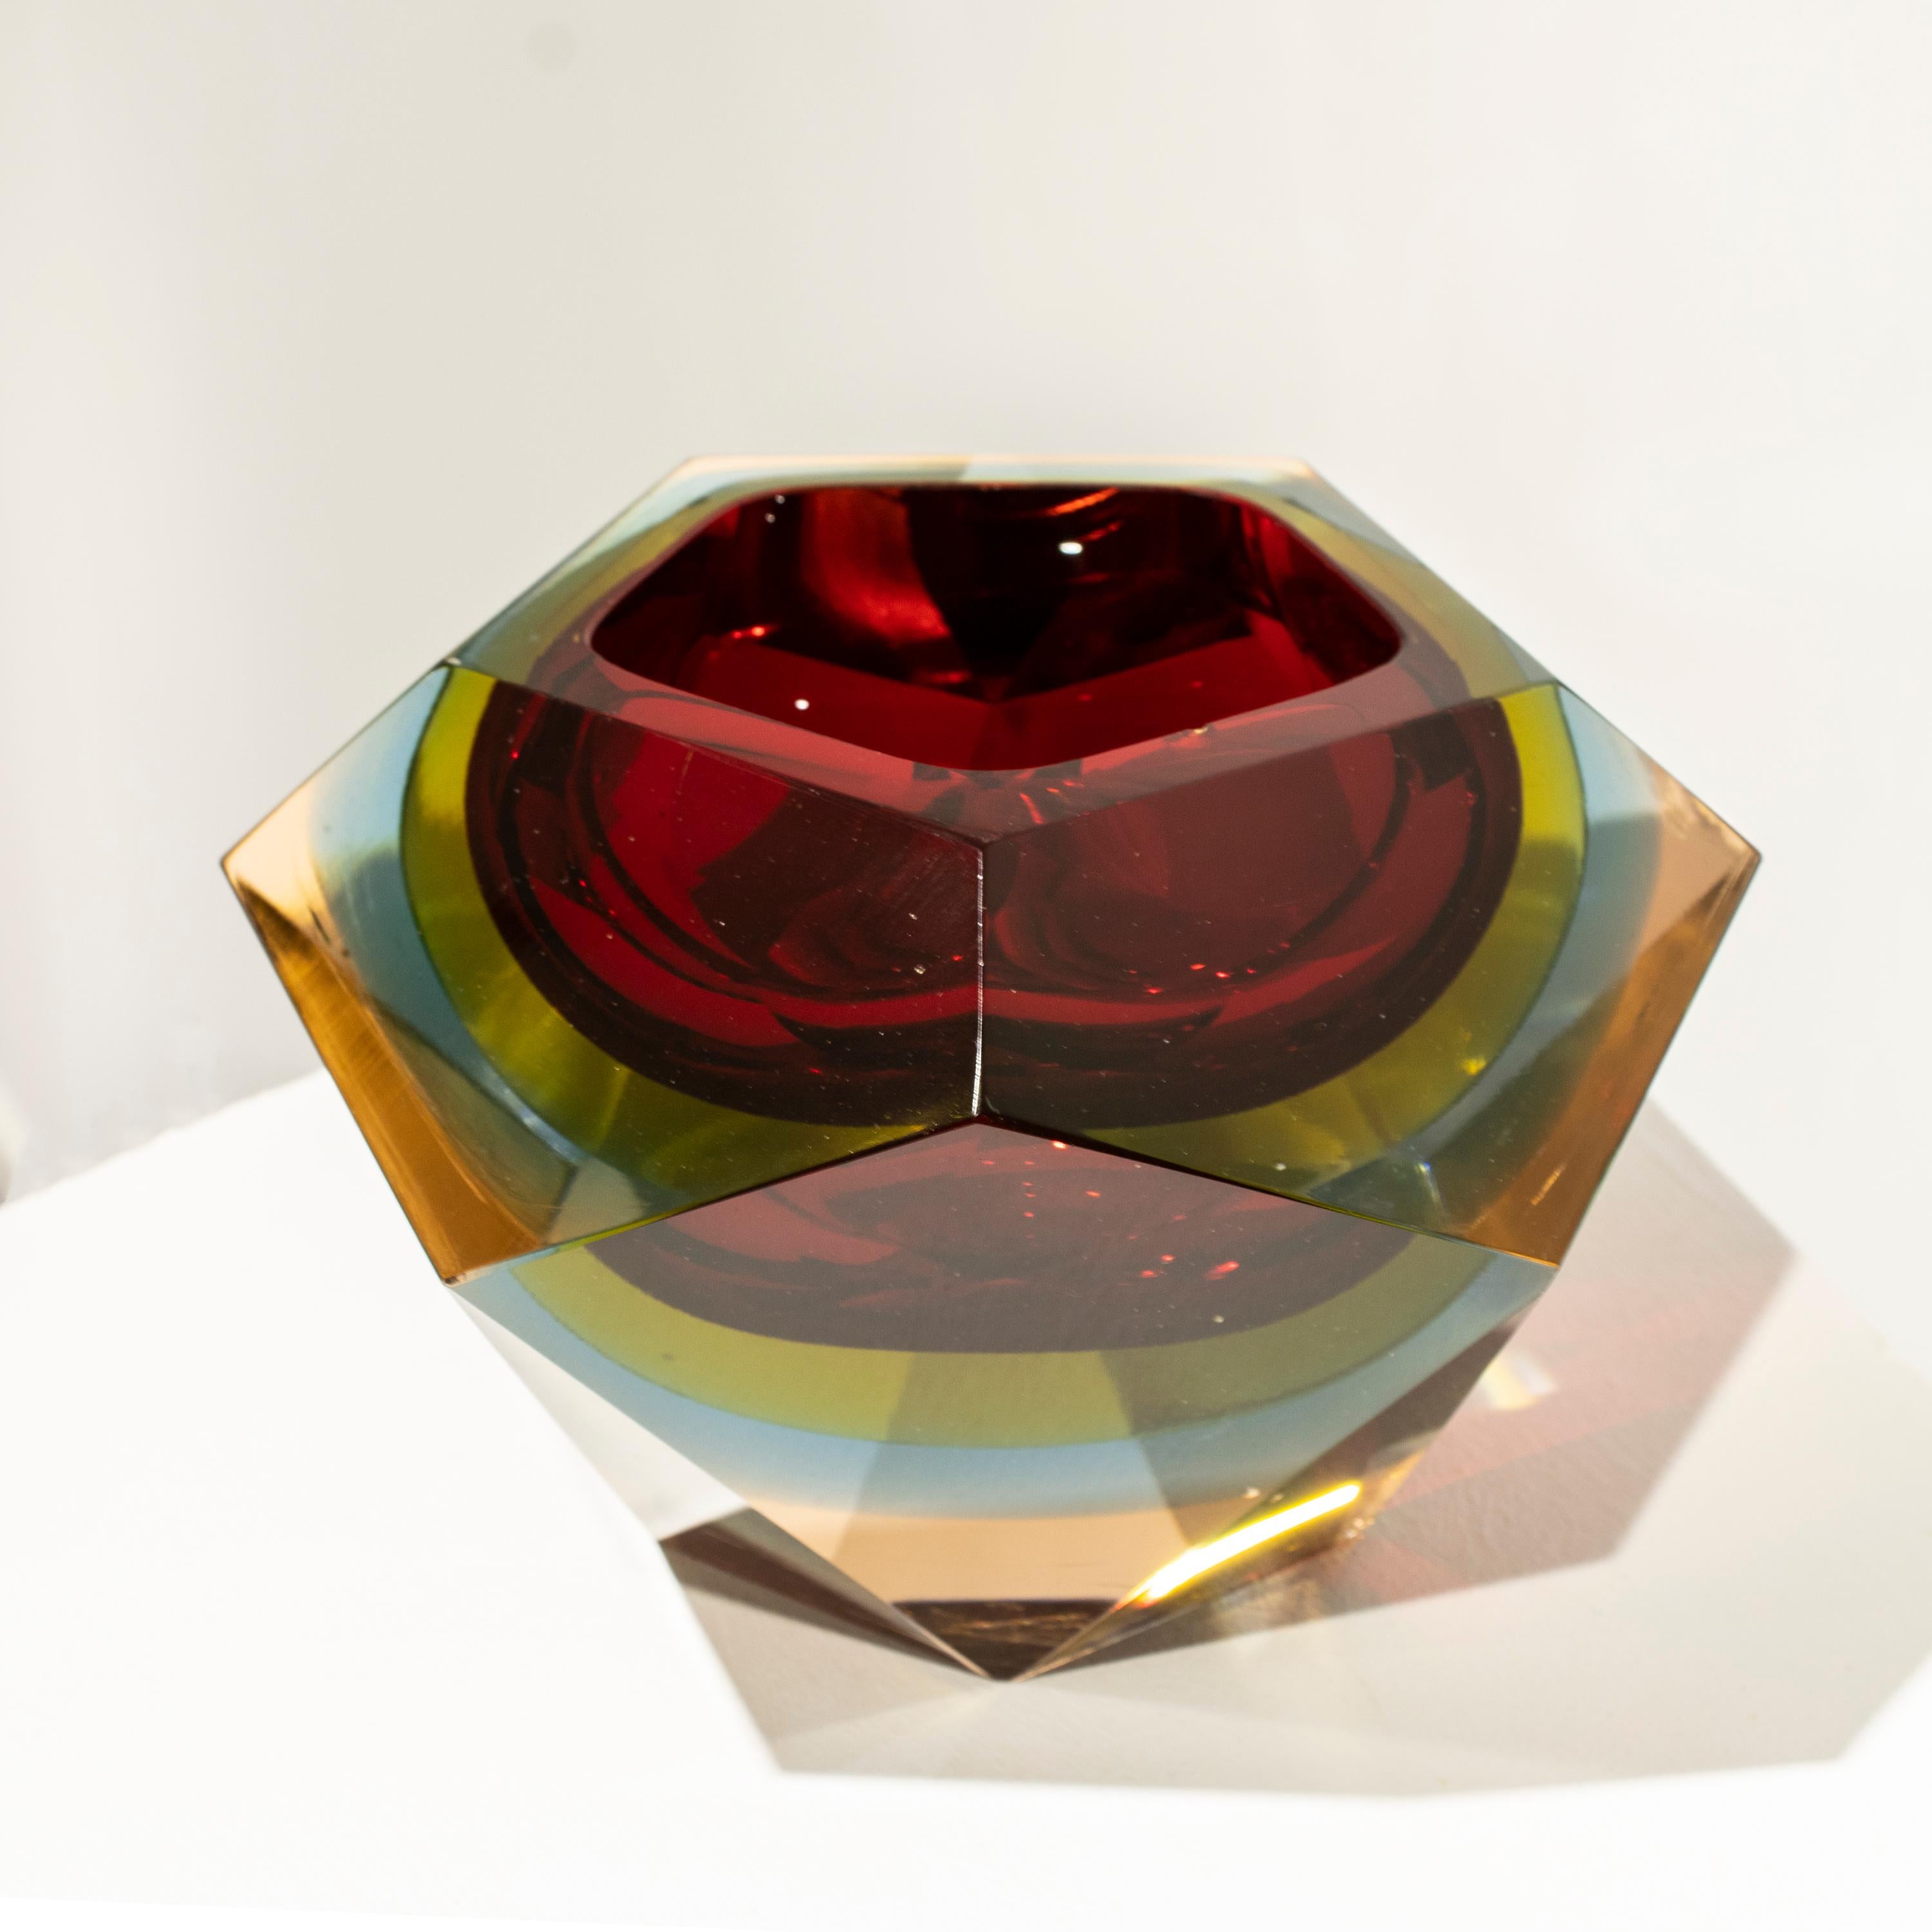 Italian vase designed by Flavio Poli in the 1970´s. The vase is hand-crafted in faceted Murano glass with a polygonal shape, in different colors with predominant red.